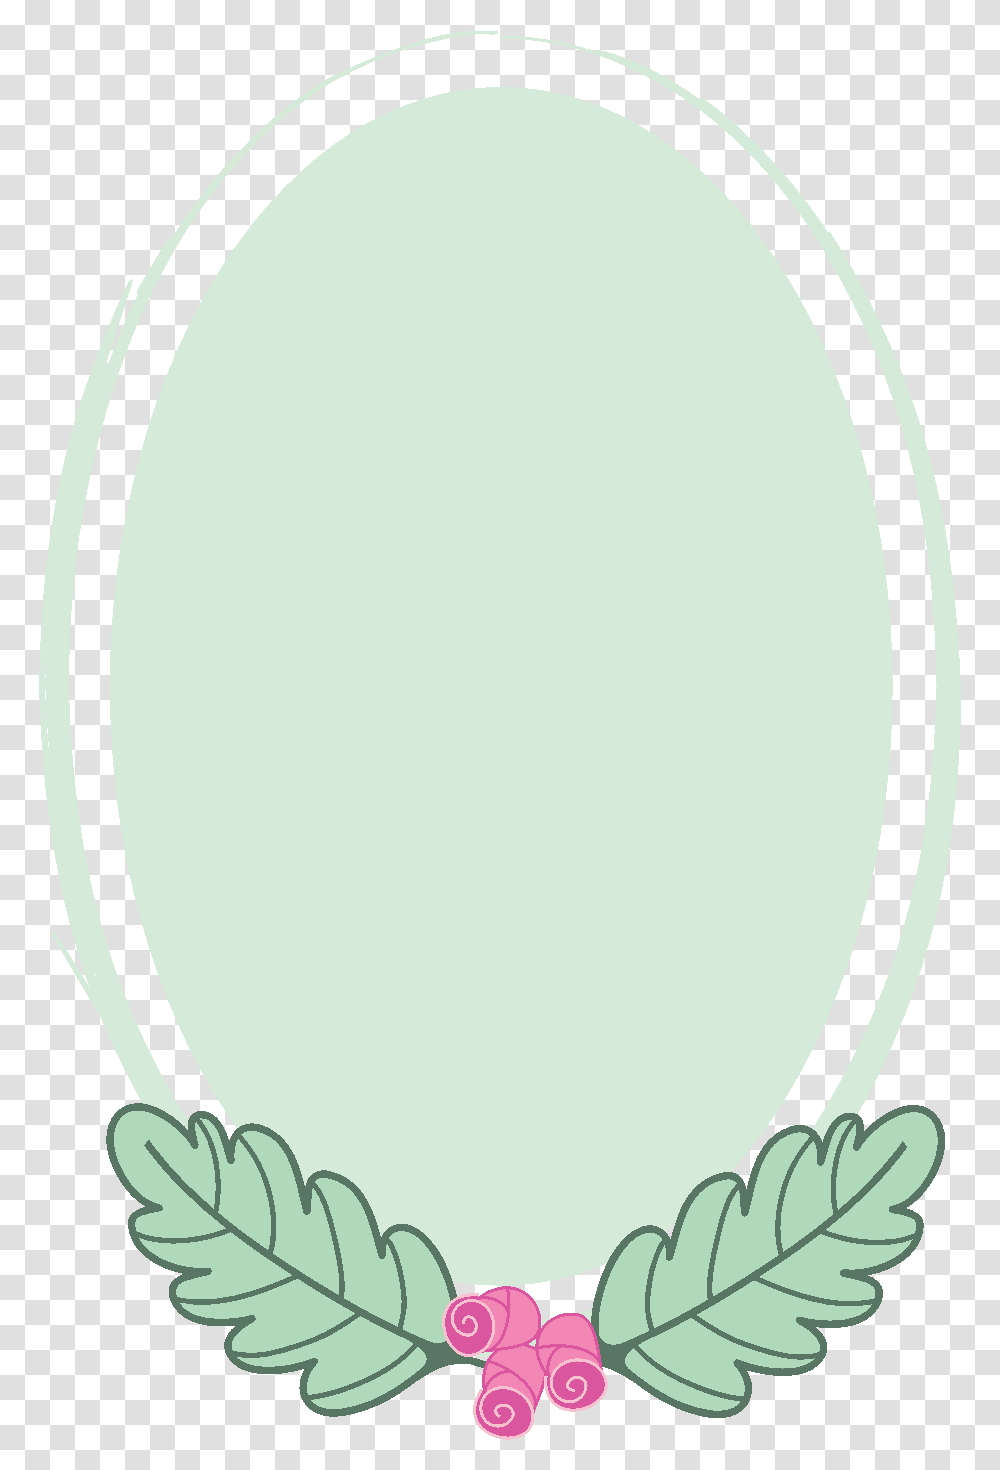 Download Hd Fresh Hand Drawn Plant Border And Vector Circle, Oval, Bow Transparent Png